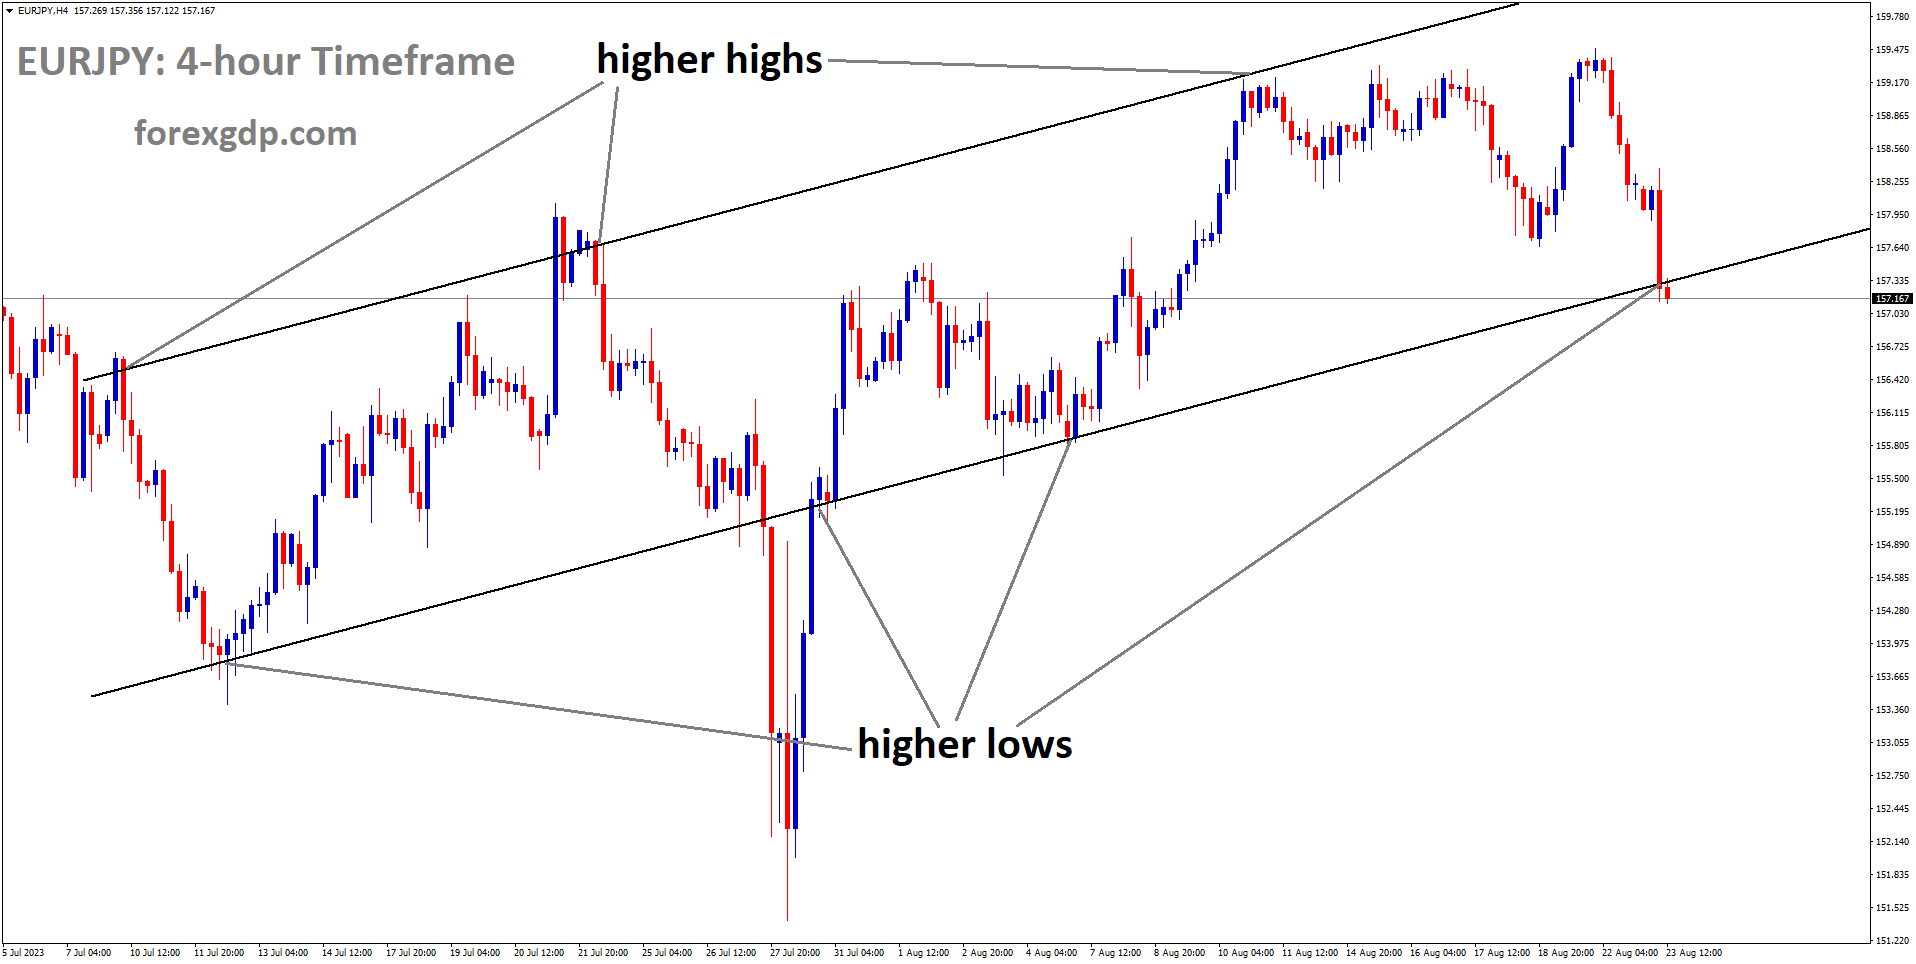 EURJPY is moving in Ascending channel and market has reached higher low area of the channel